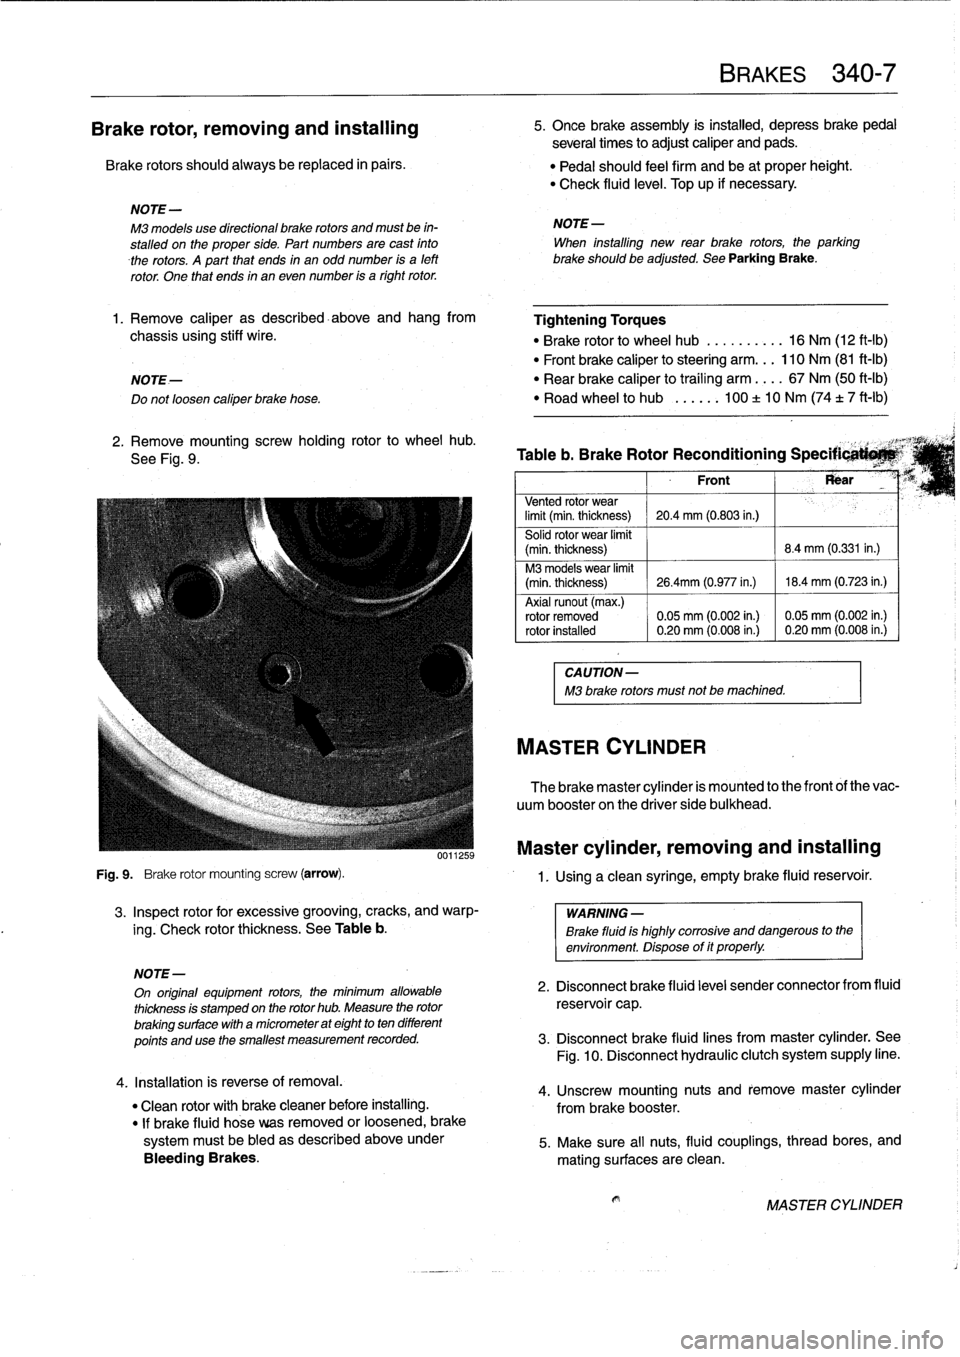 BMW M3 1996 E36 User Guide 
Brake
rotor,
removing
and
installing

Brake
rotors
shouldalways
be
replaced
in
pairs
.

Fig
.
9
.

	

Brake
rotor
mounting
screw
(arrow)
.

3
.
Inspect
rotor
for
excessive
grooving,
cracks,
and
warp-